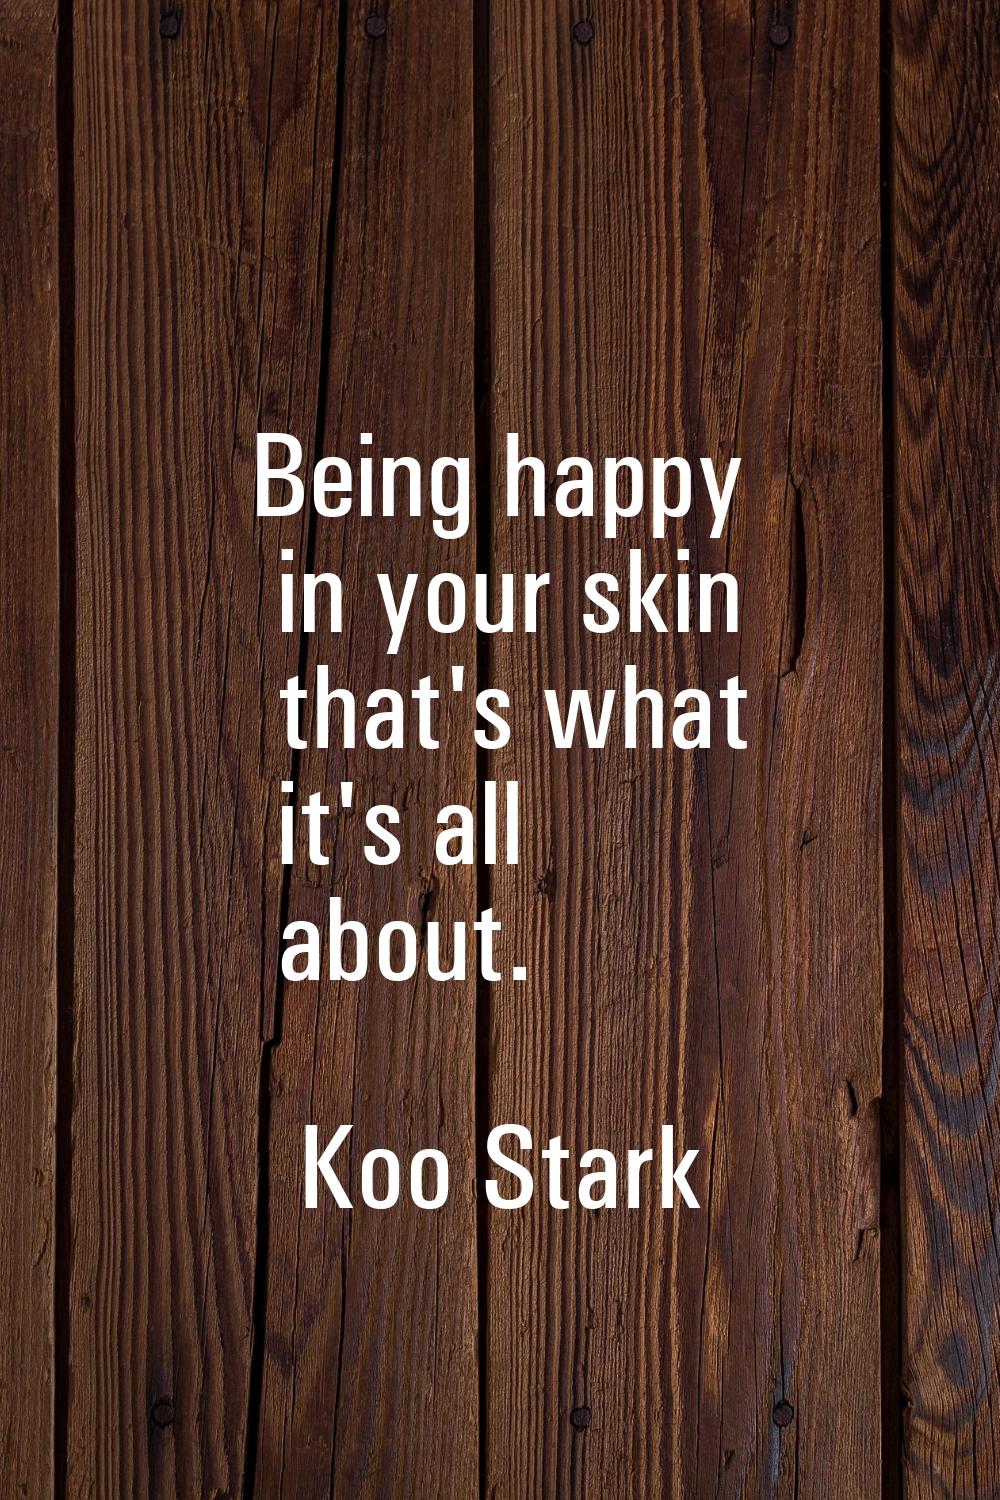 Being happy in your skin that's what it's all about.